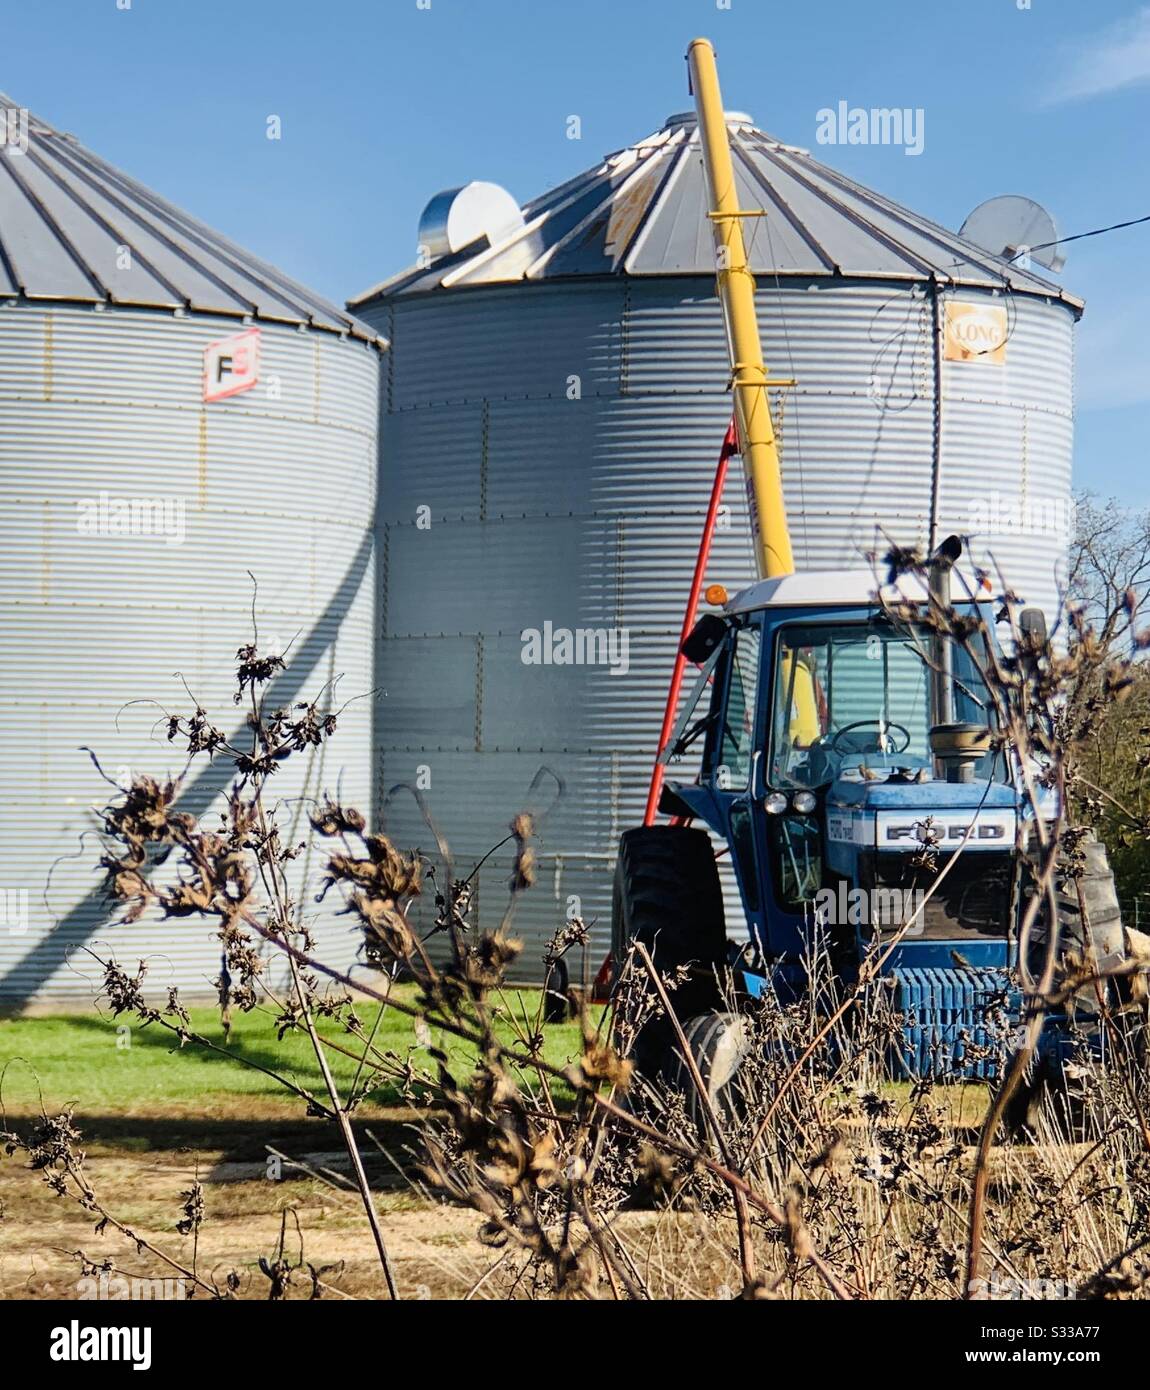 DUBUQUE, IOWA, Fall 2019--Landscape photo of retro blue and white Ford tractor at work in front of grain bins under a bright blue sky on fall harvest day. Stock Photo